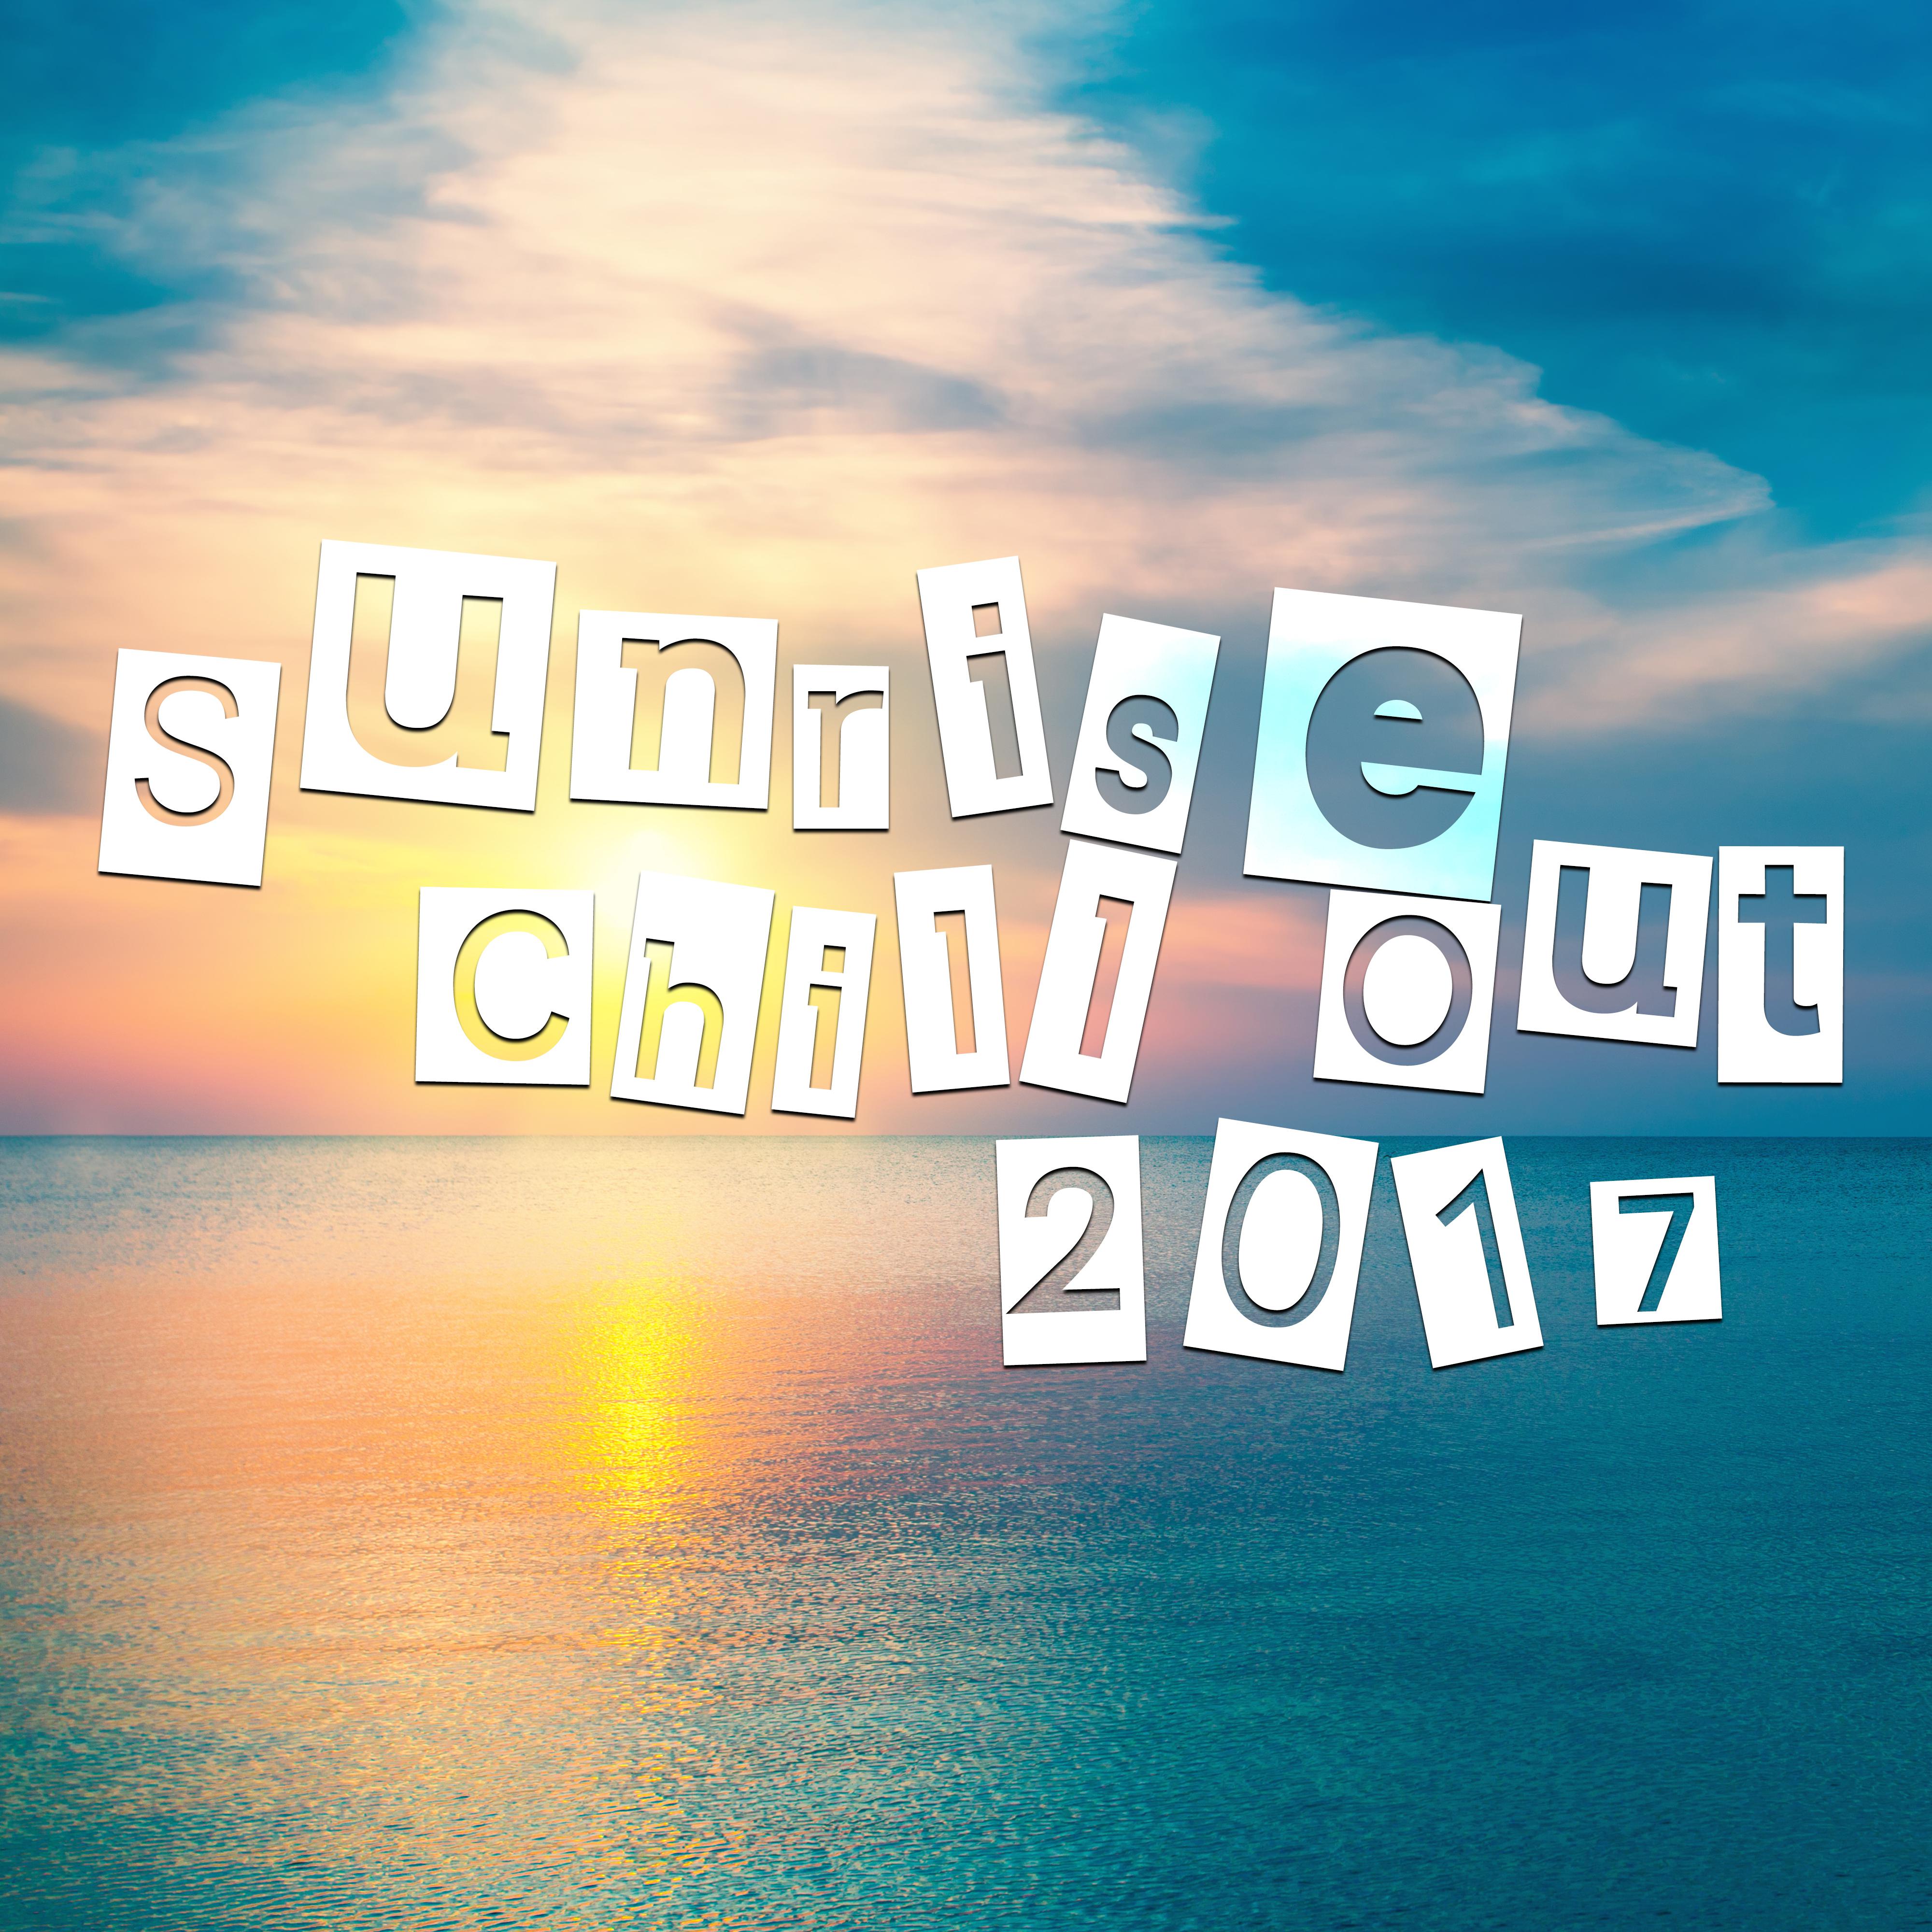 Sunrise Chill Out 2017  Calming Beach Sounds, Relaxing Melodies, Miami Summertime, Chilled Music